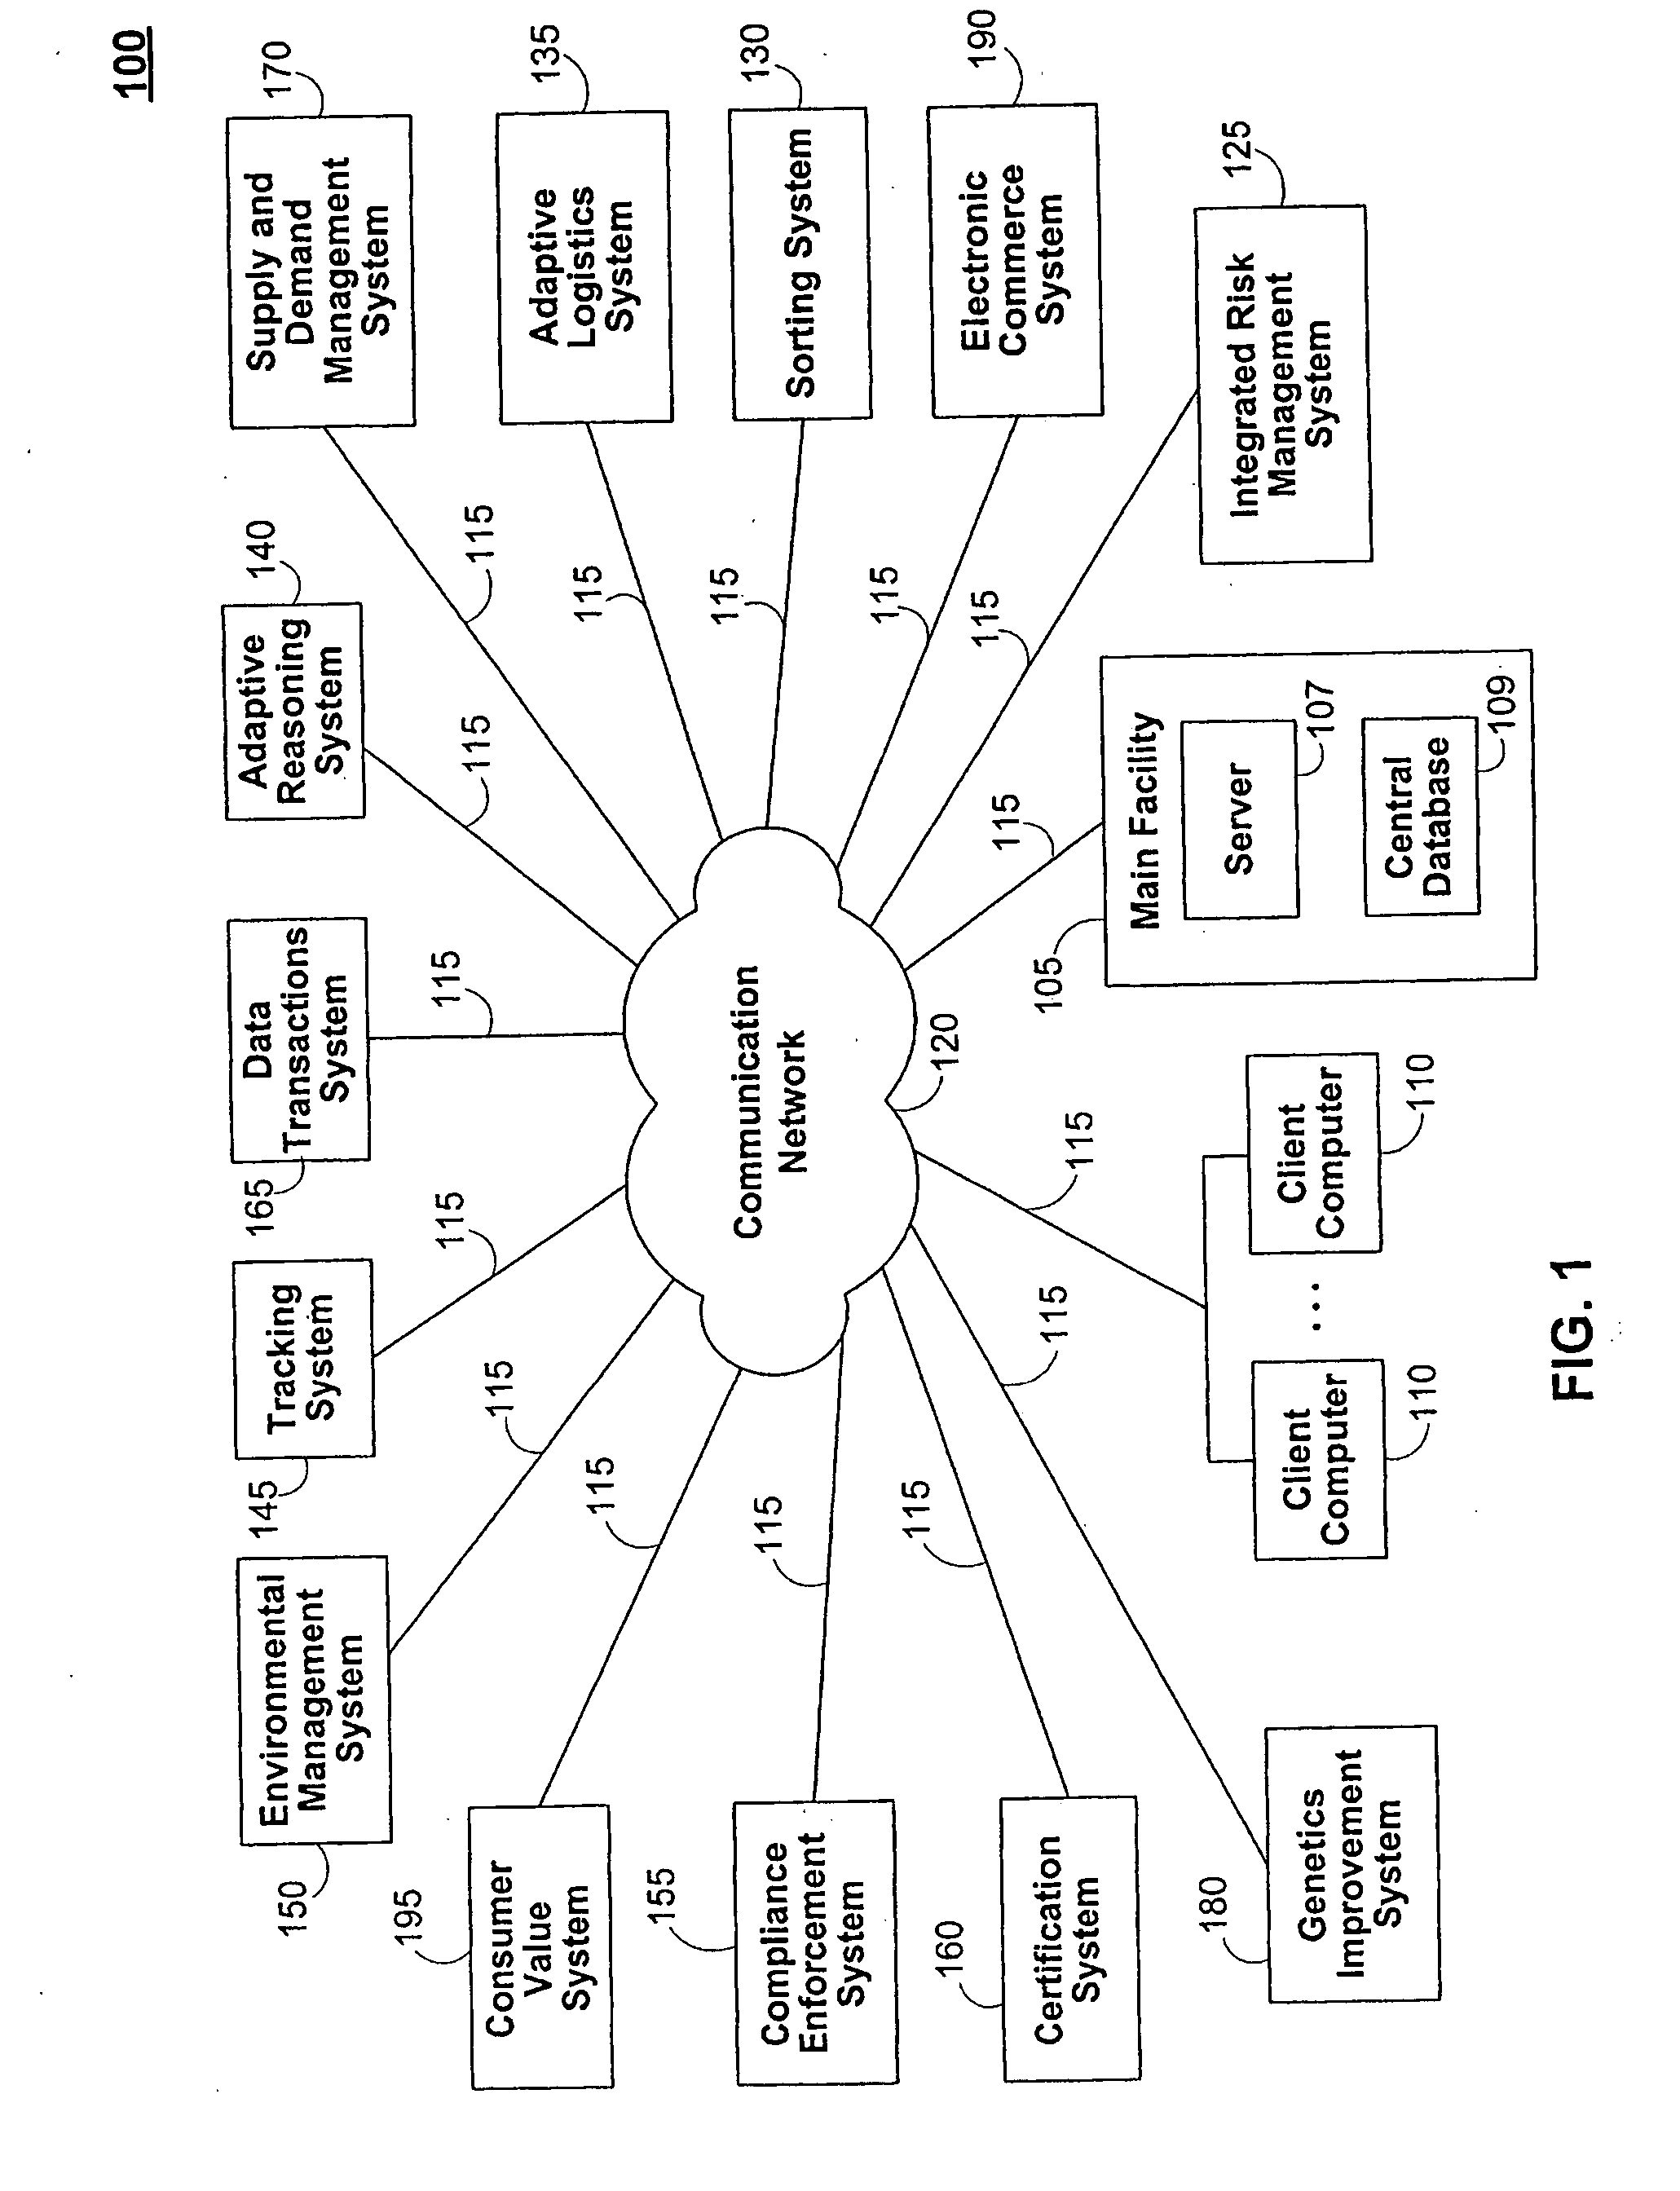 Liverstock management systems and methods